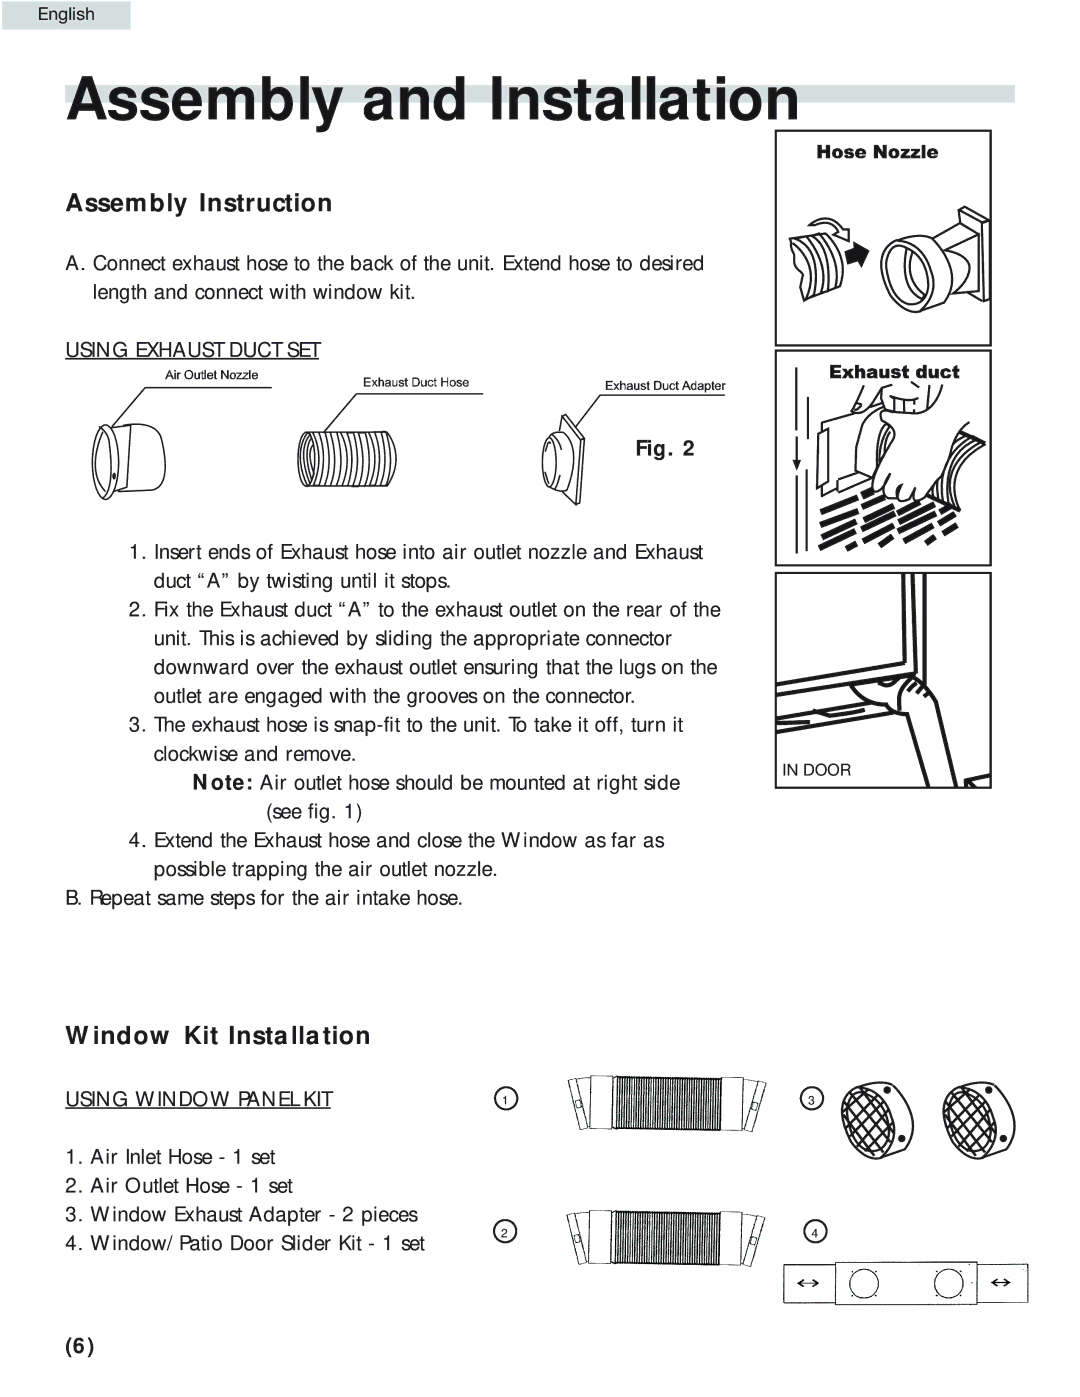 Haier HPRD12HC5 manual Assembly and Installation, Assembly Instruction, Window Kit Installation 